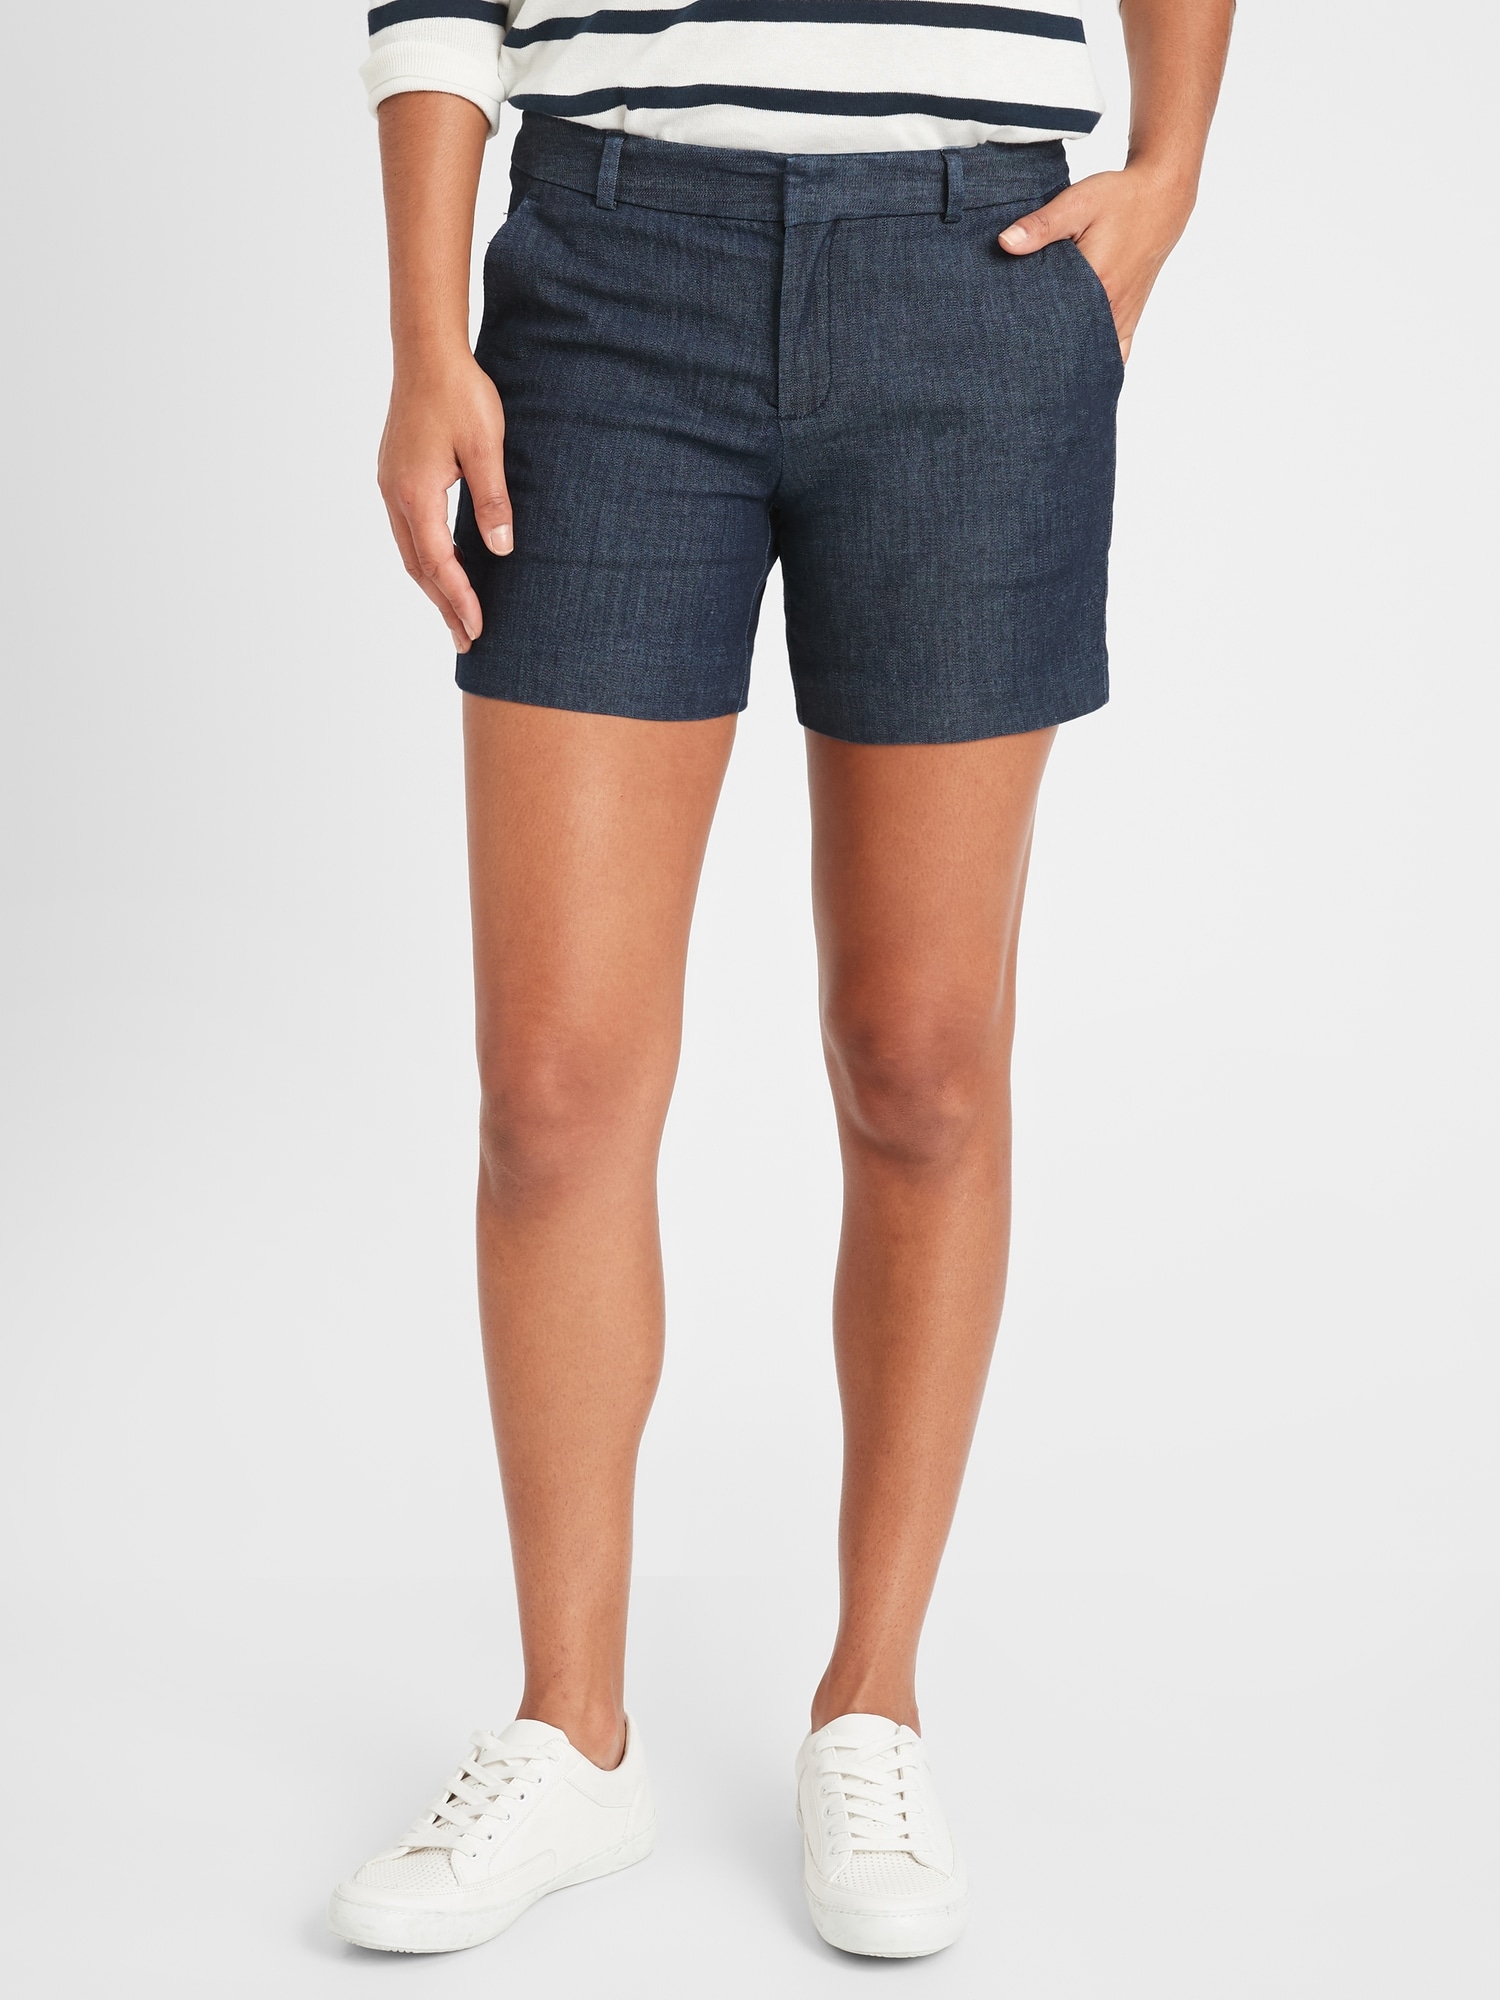 Tailored Chambray Shorts - 5 inch inseam